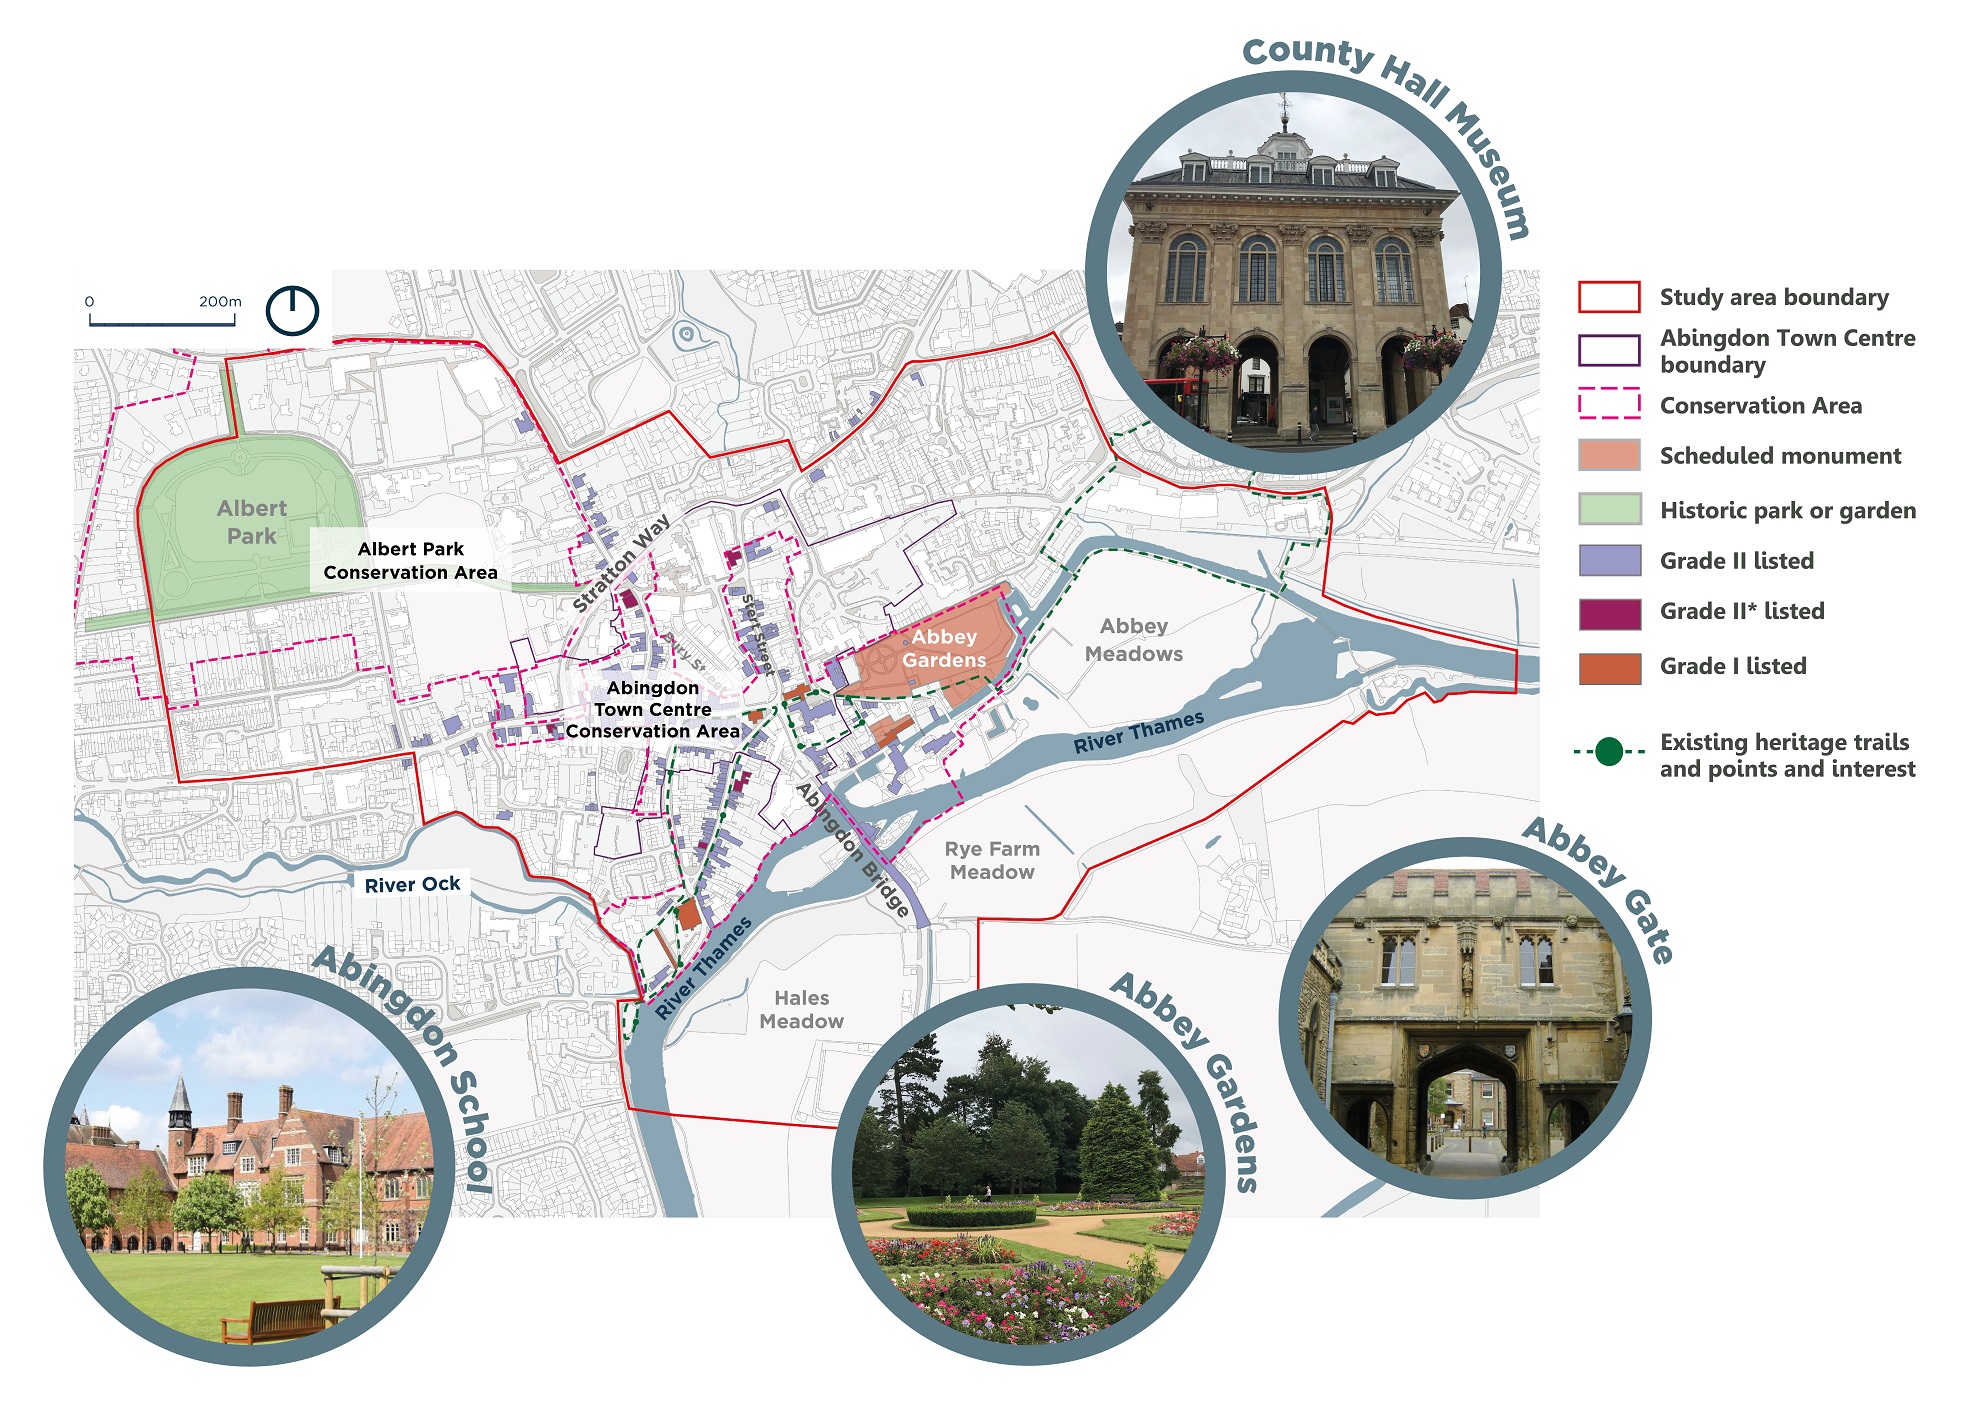 The plan illustrates the position of the two conservation areas, Albert Park conservation area and Abingdon Town Centre Conservation area in relation to the CARF study area. The plan shows the buildings that are listed and areas that are scheduled monuments, including Abbey Gardens. An existing heritage trail and points of interest are identified, extending west from Market Place to St Helen’s Church and east towards Abbey Meadows.